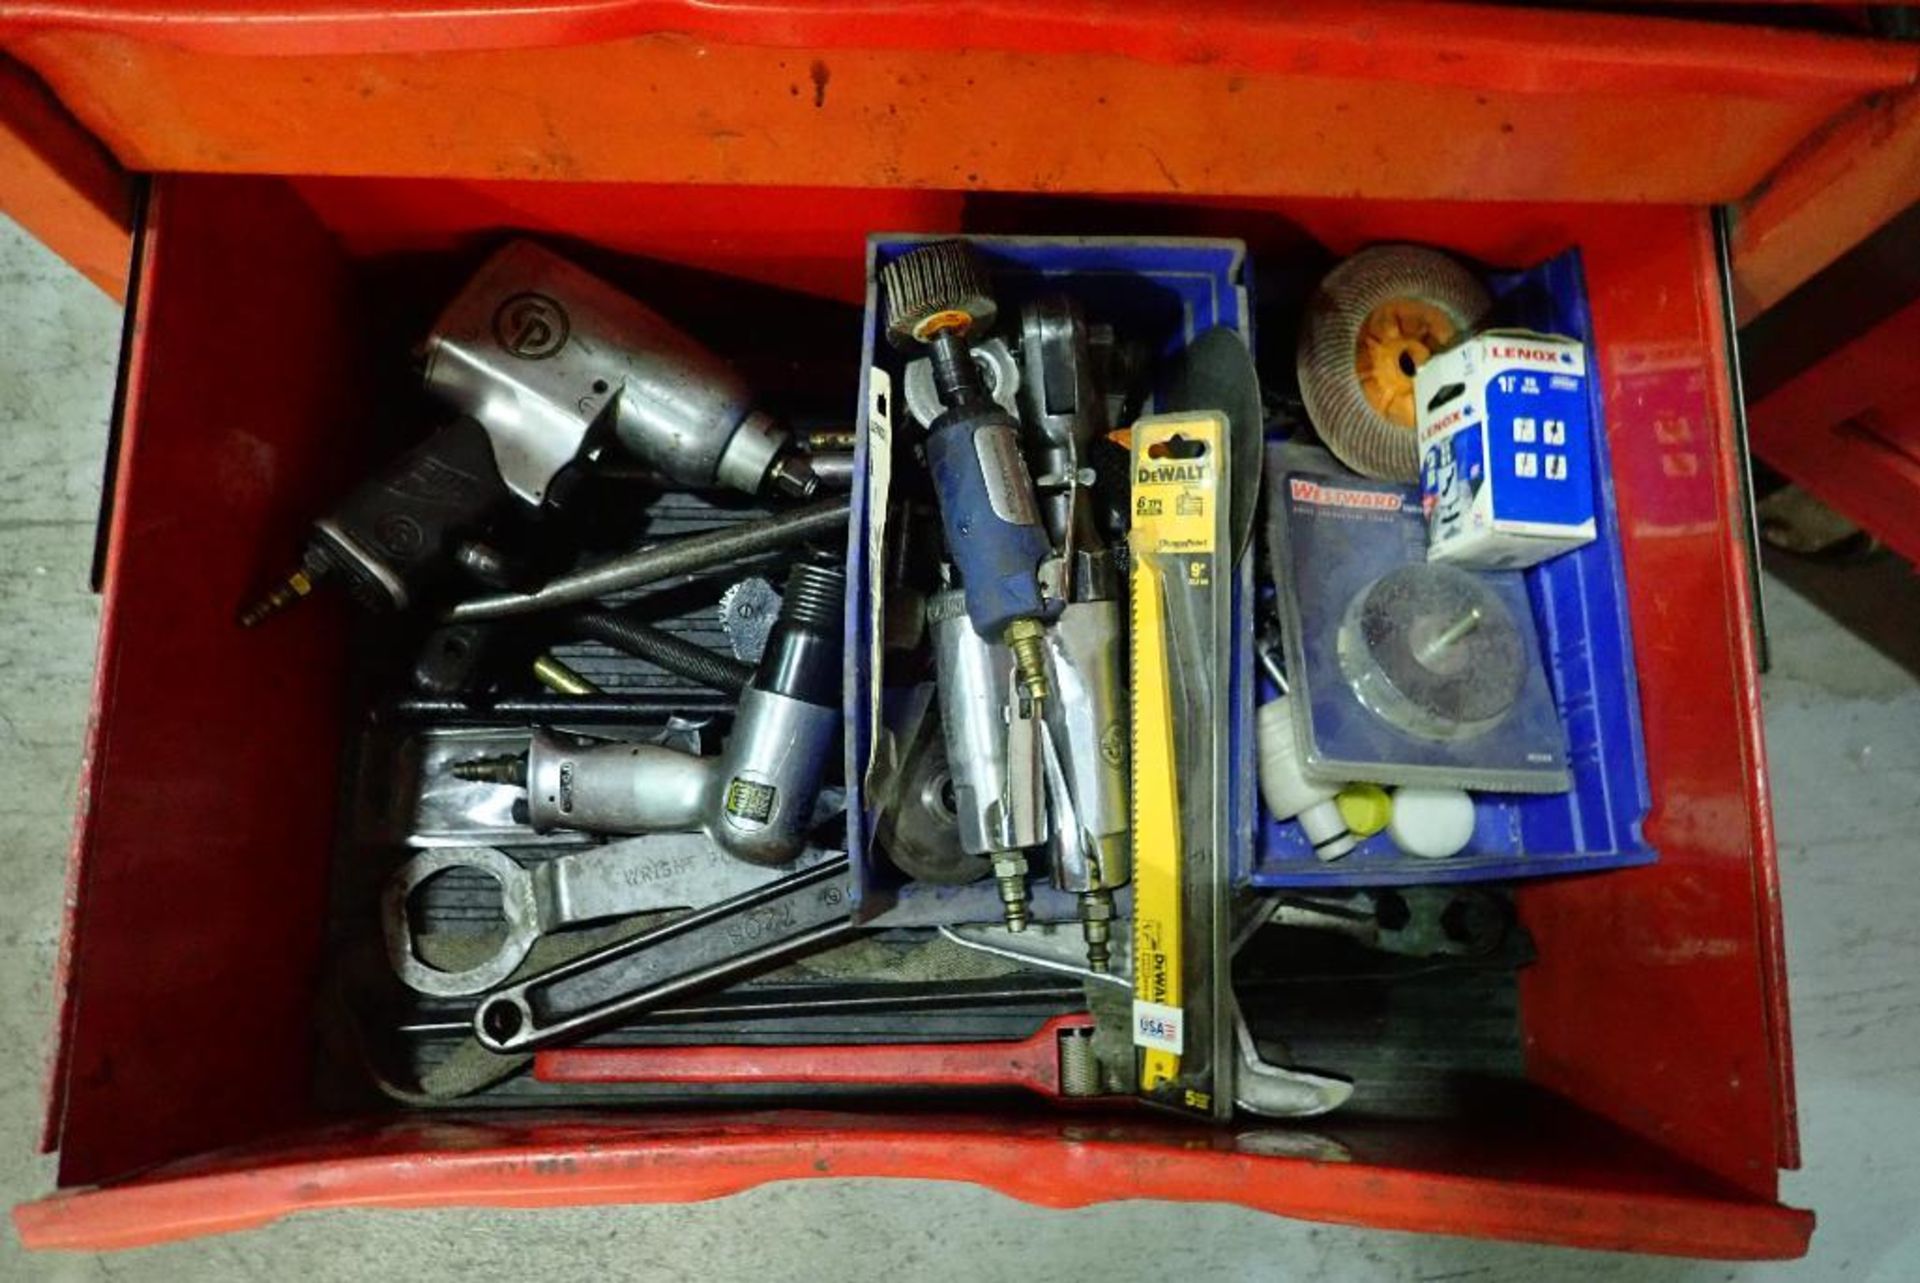 (2) tool chests with contents, wrenches, sockets, drill bits screw drivers, air tools, hammers, plie - Image 31 of 31